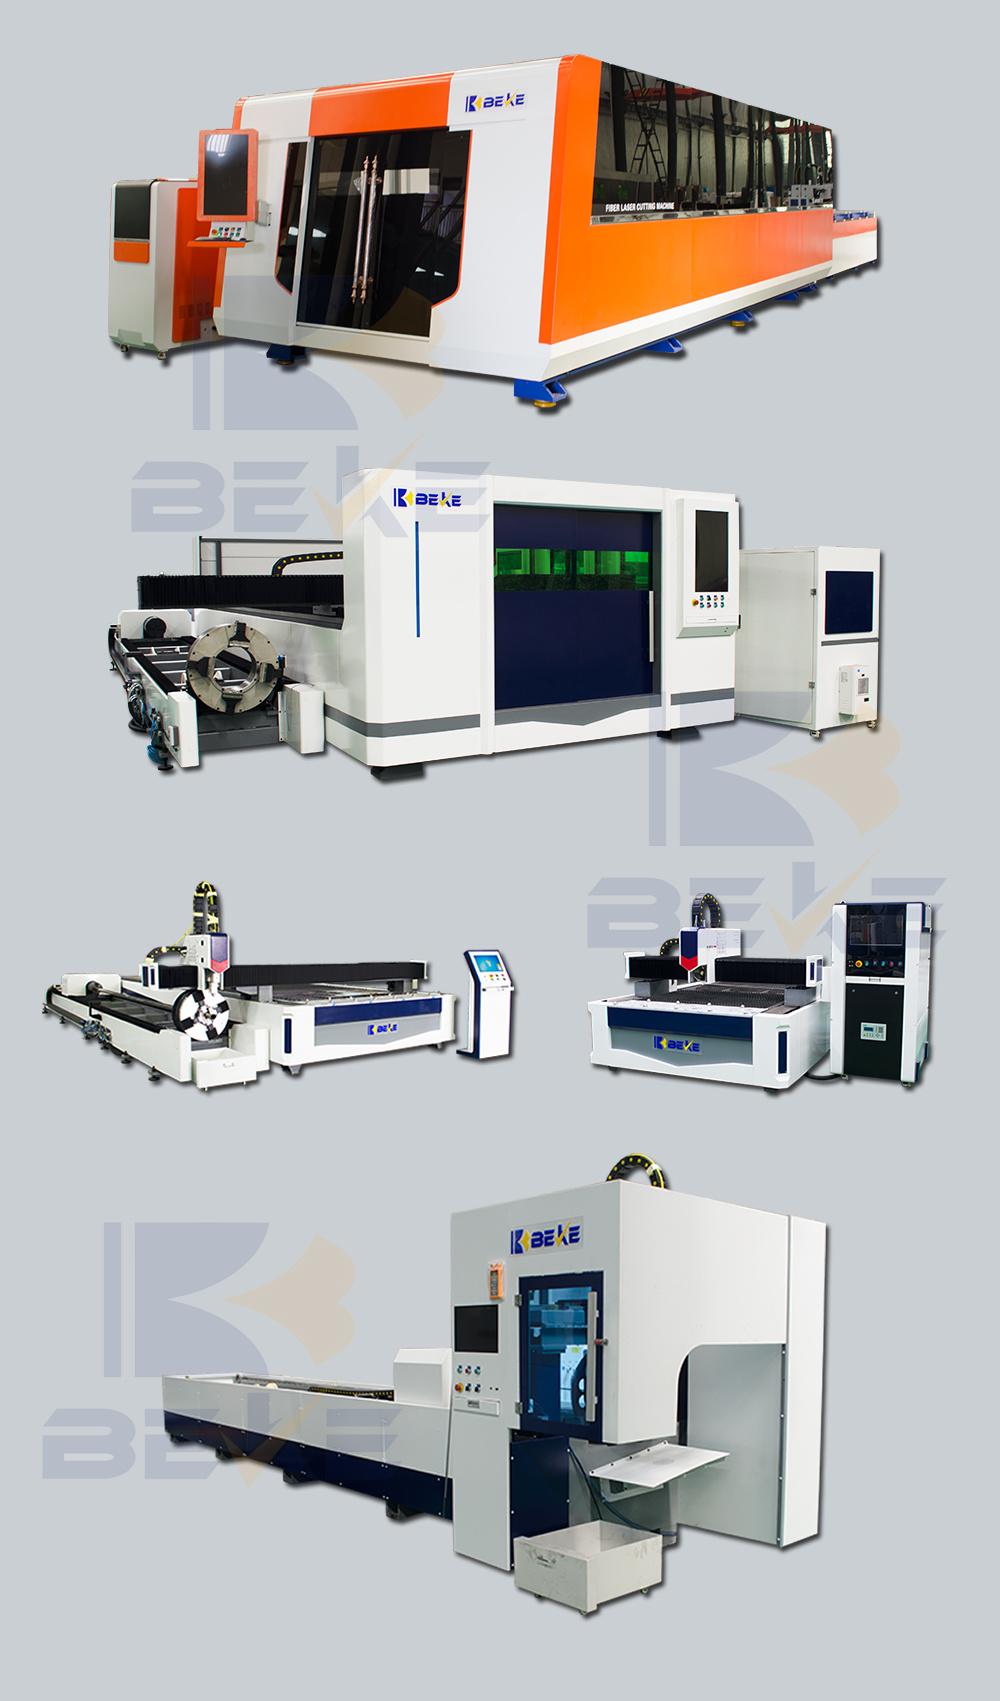 Beke Closed Type CNC Fiber Laser Cutting Machine Factory Outlet